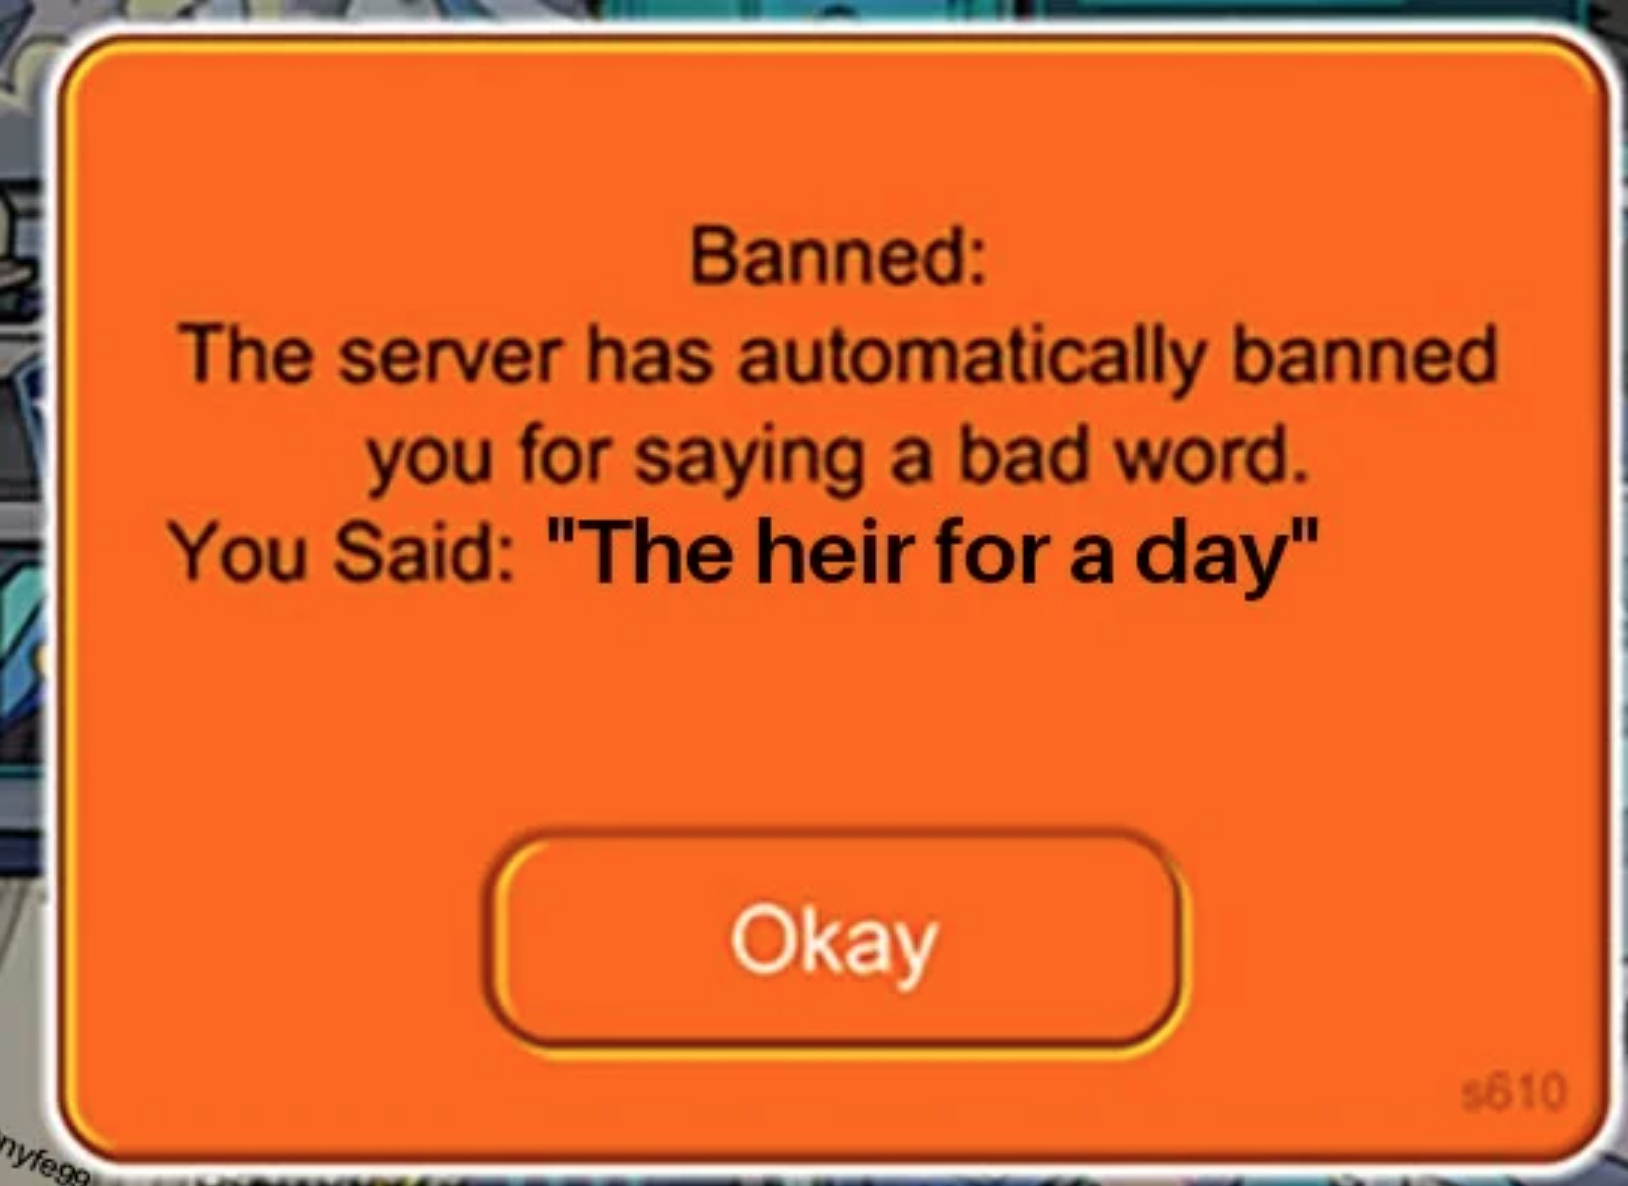 club penguin banned memes - nyfega Banned The server has automatically banned you for saying a bad word. You Said "The heir for a day" Okay 5610